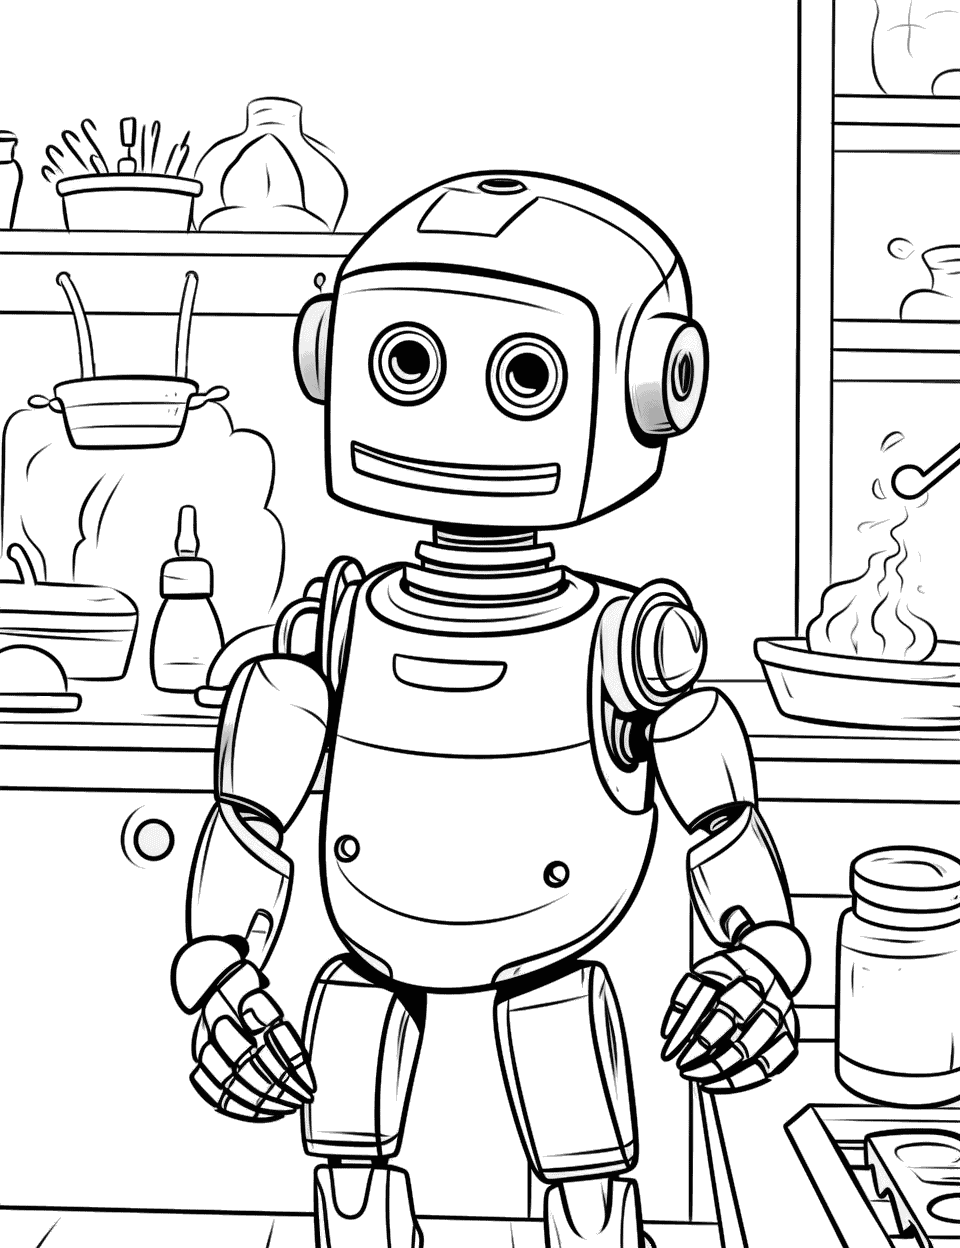 Friendly Robot Chef Cooking Coloring Page - A robot cooking a meal in the kitchen.